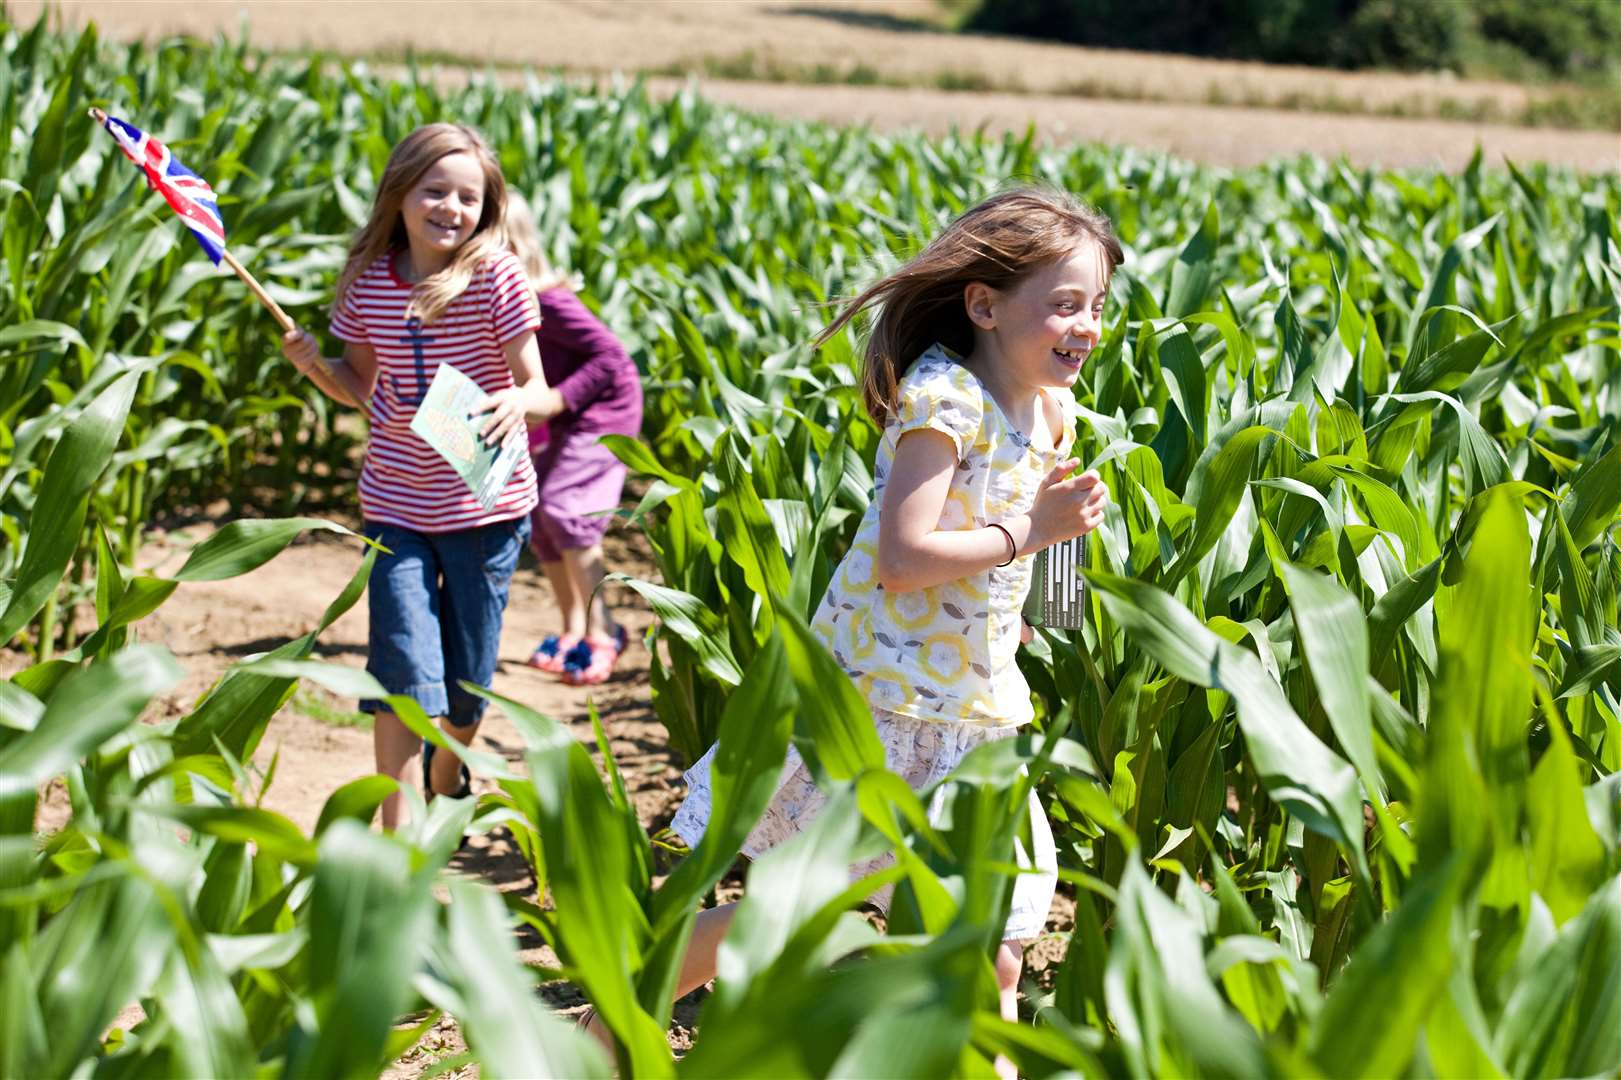 The Maize Maze at Penshurst Place is not being grown this year